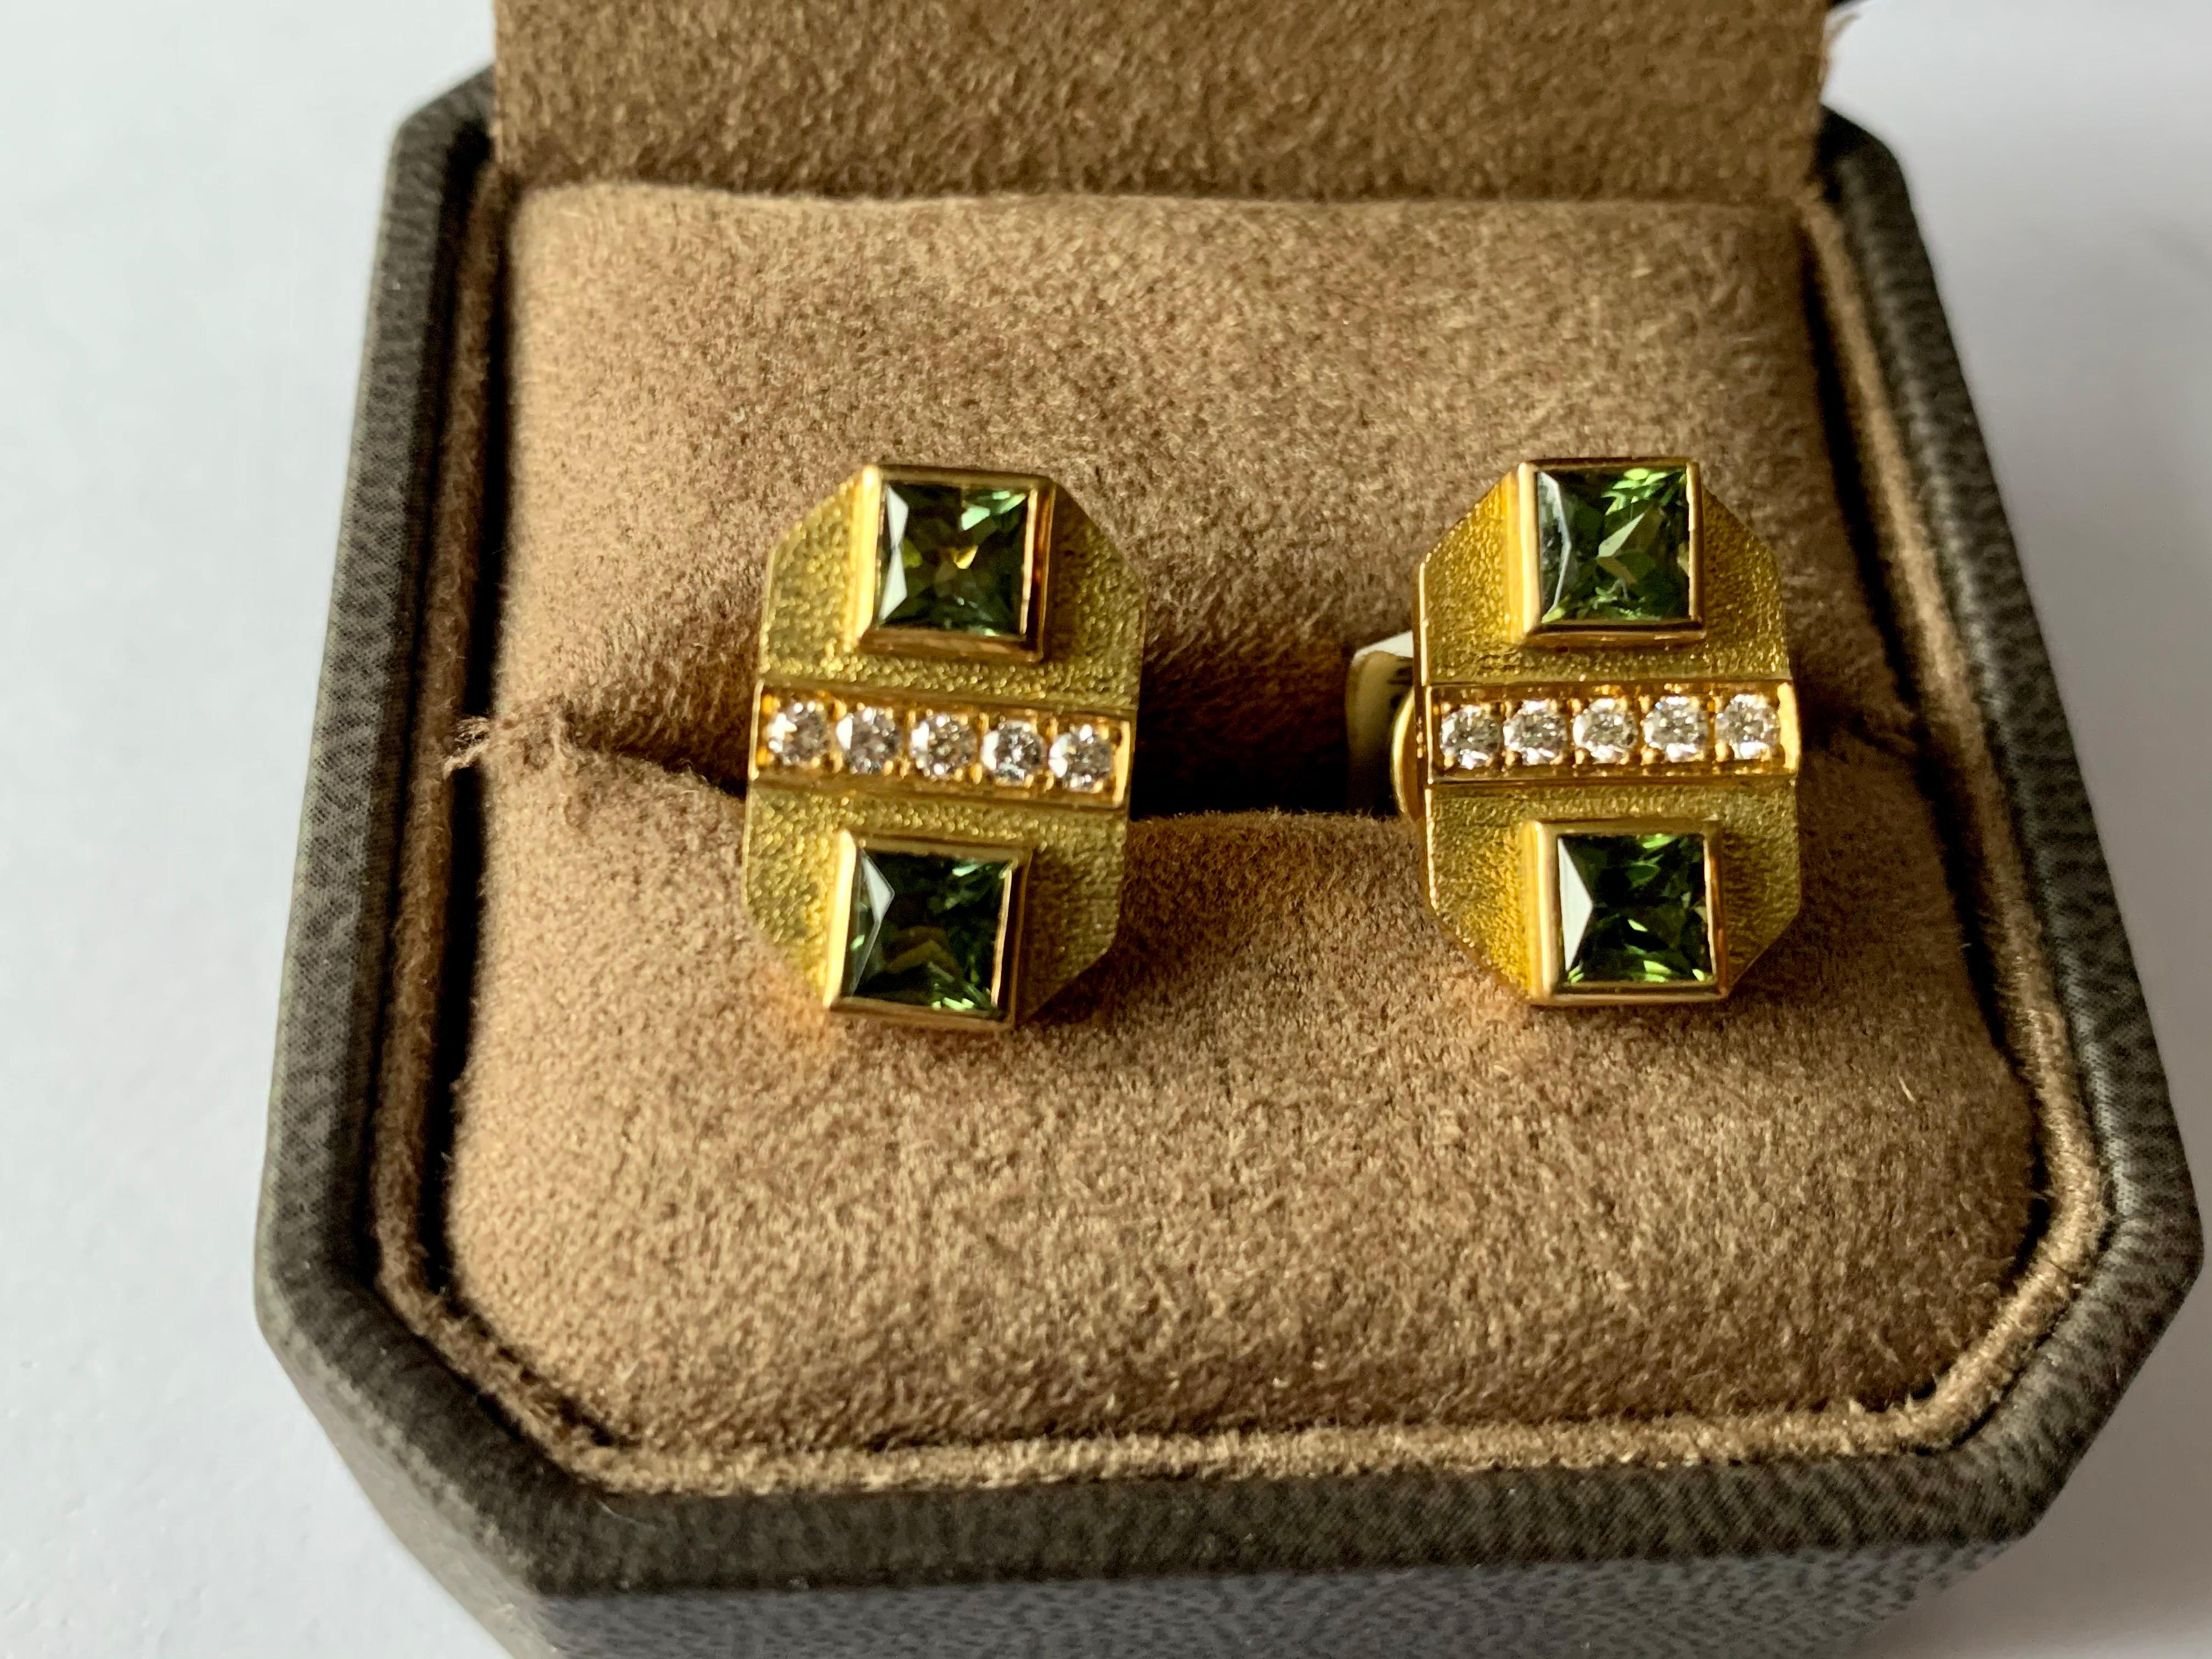 A pair of very attractive 18 K yellow Gold cufflinks featuring 4 green Tourmalines weighing 3.06 ct. accentuated by 10 brilliant cut Diamonds weighing 0.30 ct. The texture of the surface is delicately brushed and creates an understated look. The